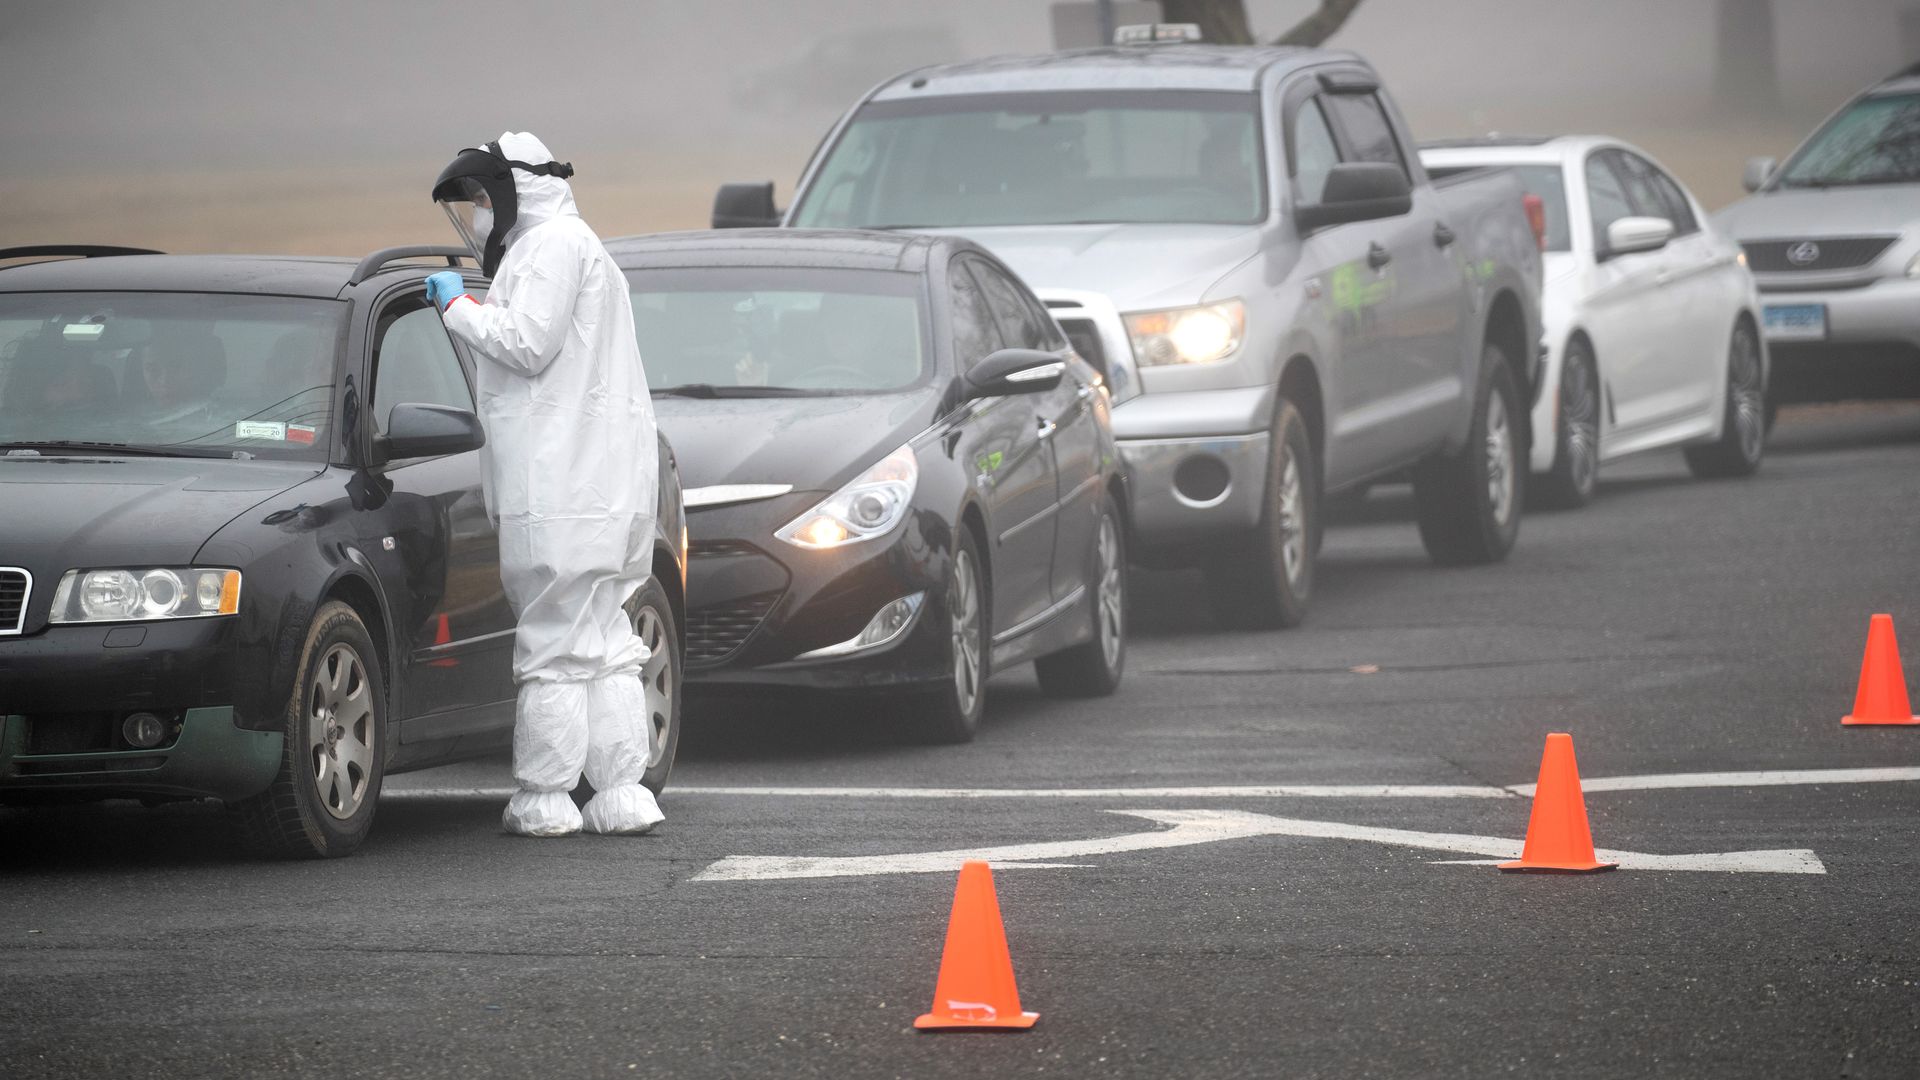 In this image, a worker stands in a protective medical suit next to a line of cars